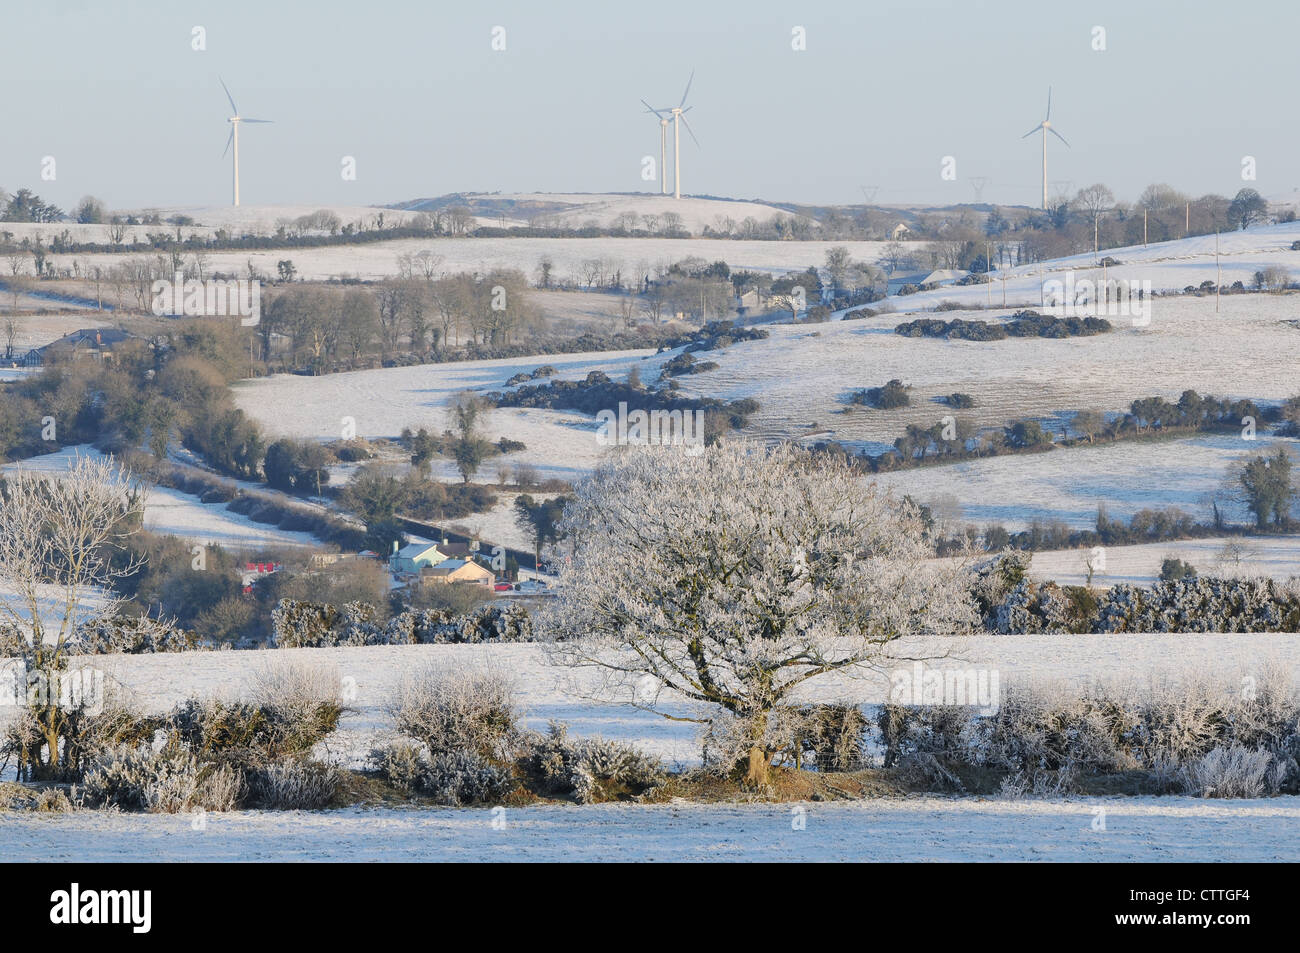 Wind turbines on the horizon of a snow covered landscape, Mount Oriel, Collon, County Louth, Ireland Stock Photo